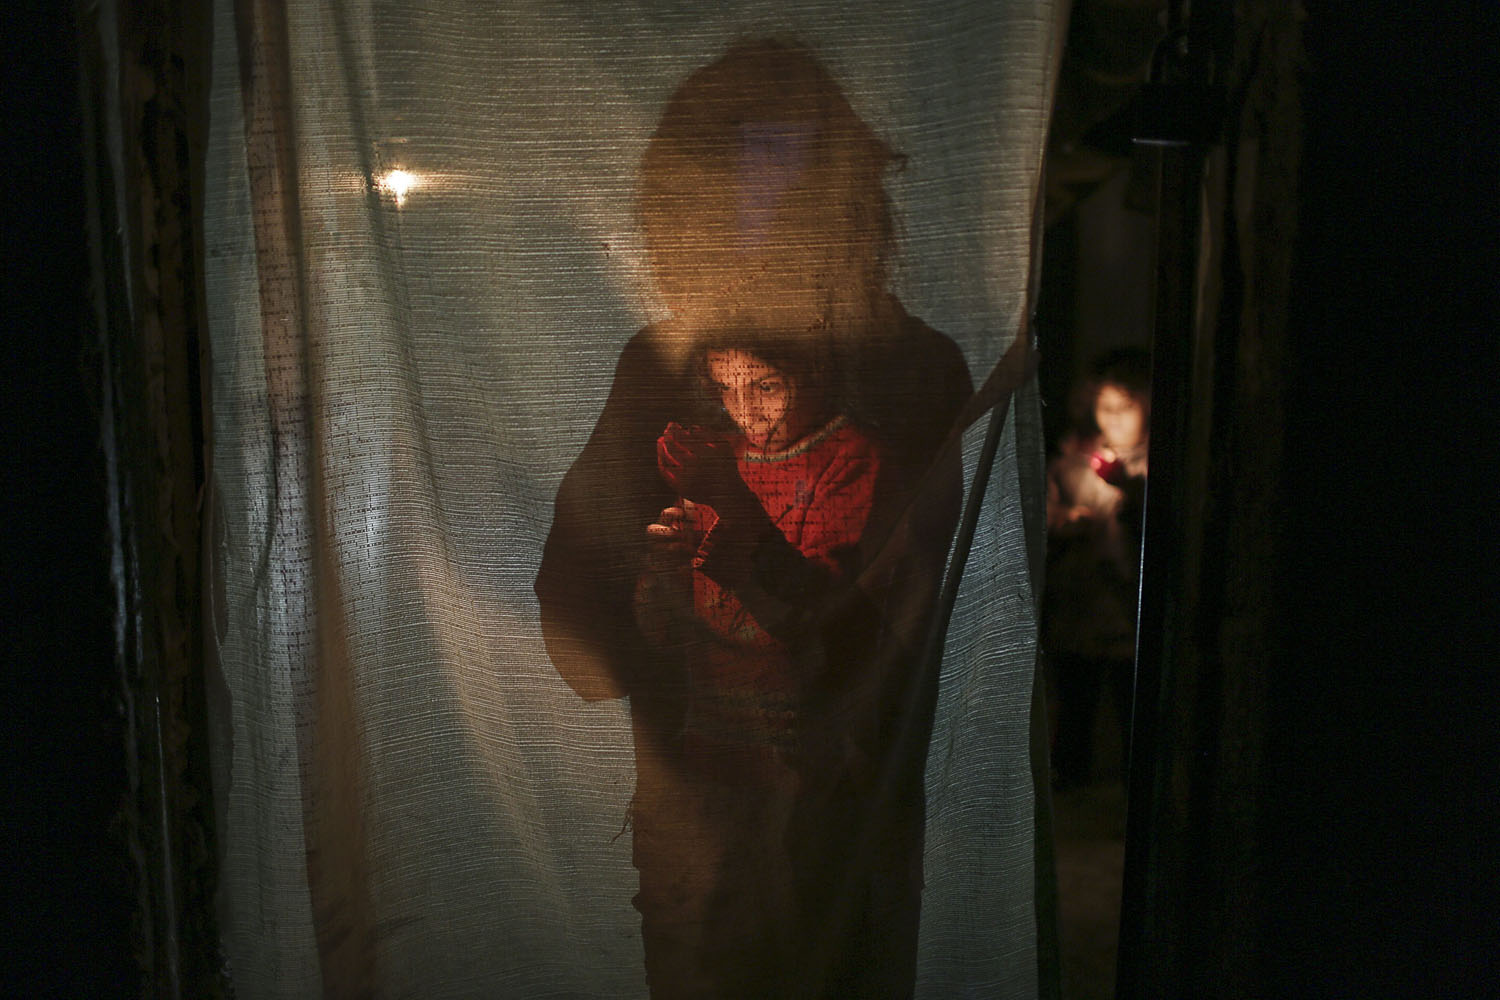 Nov. 18, 2013. A Palestinian girl holds a candle inside her family's house during a power cut in Jabaliya refugee camp, in northern Gaza Strip.